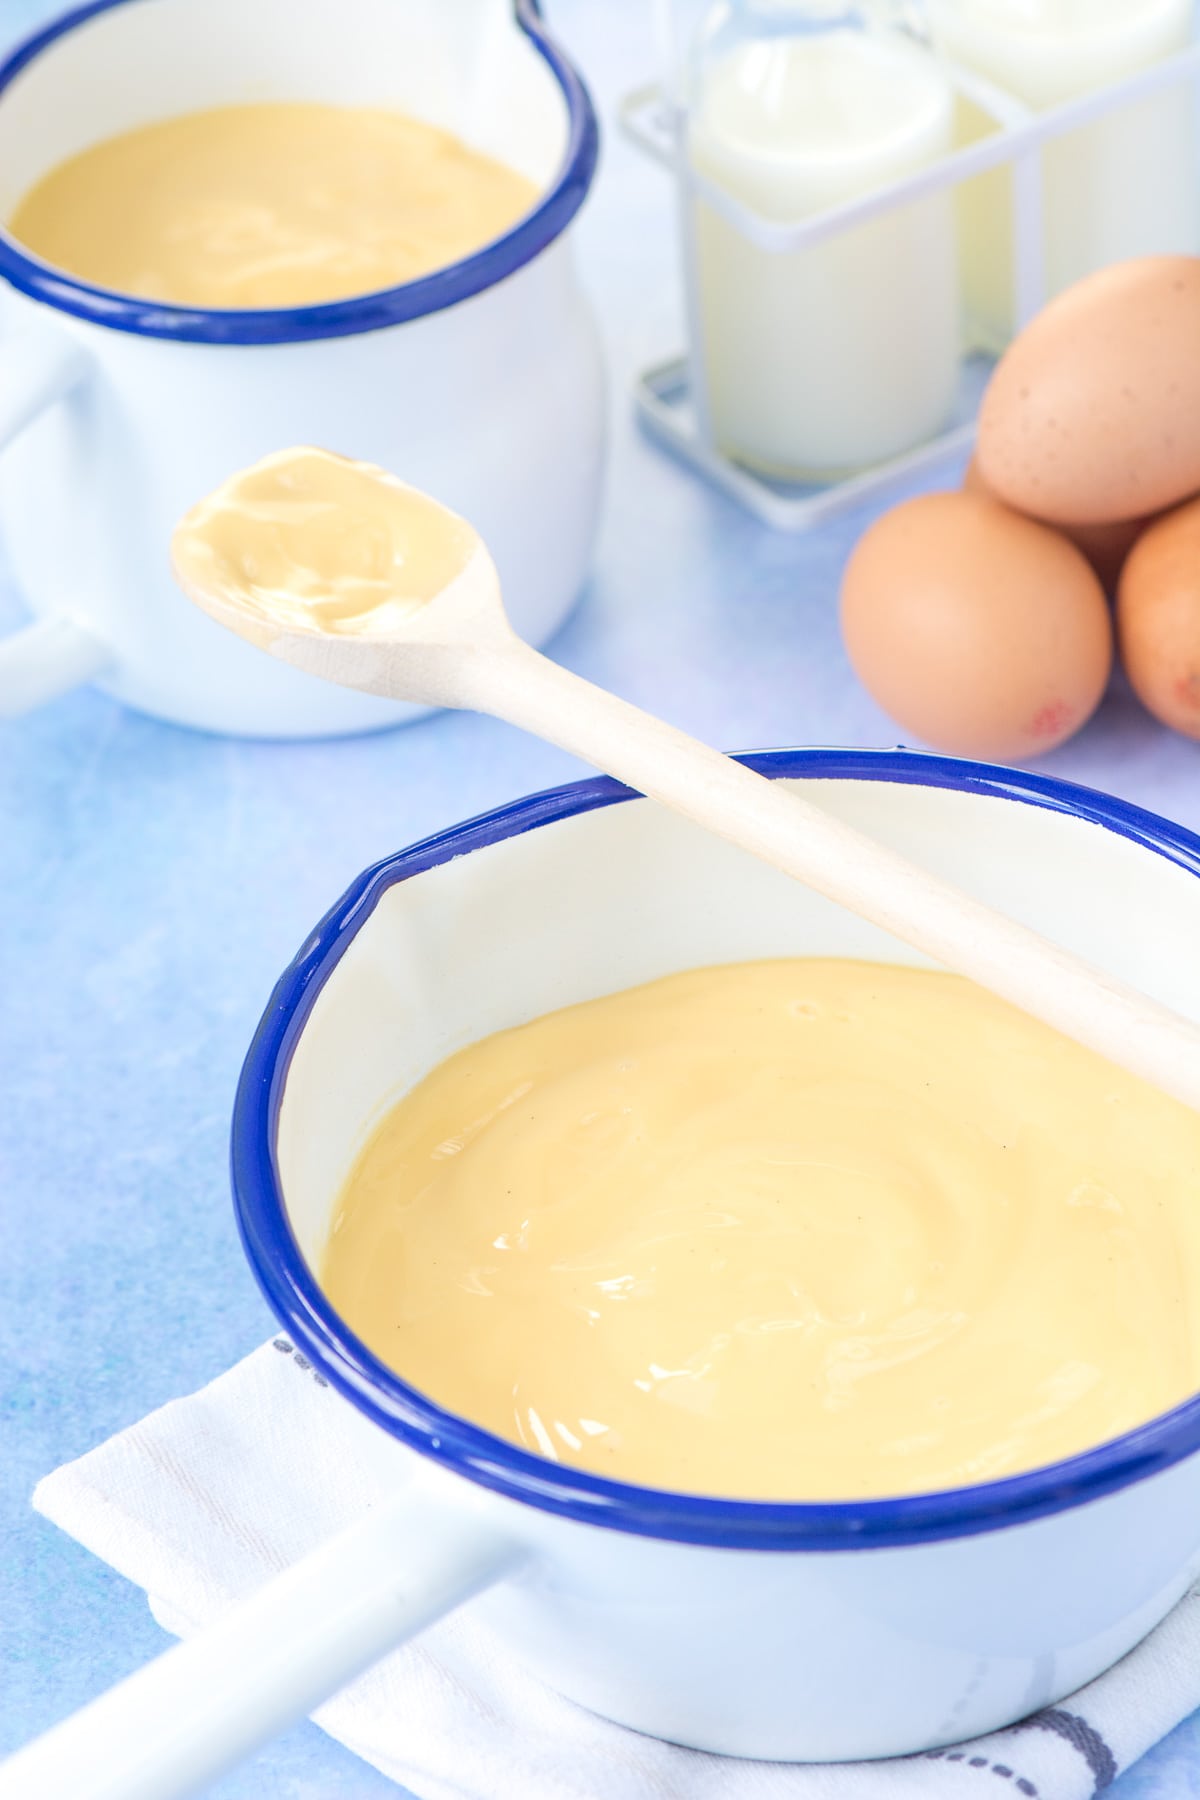 A pan of delicious homemade custard made with egg yolks, milk, sugar, a little flour and plenty of vanilla extract.